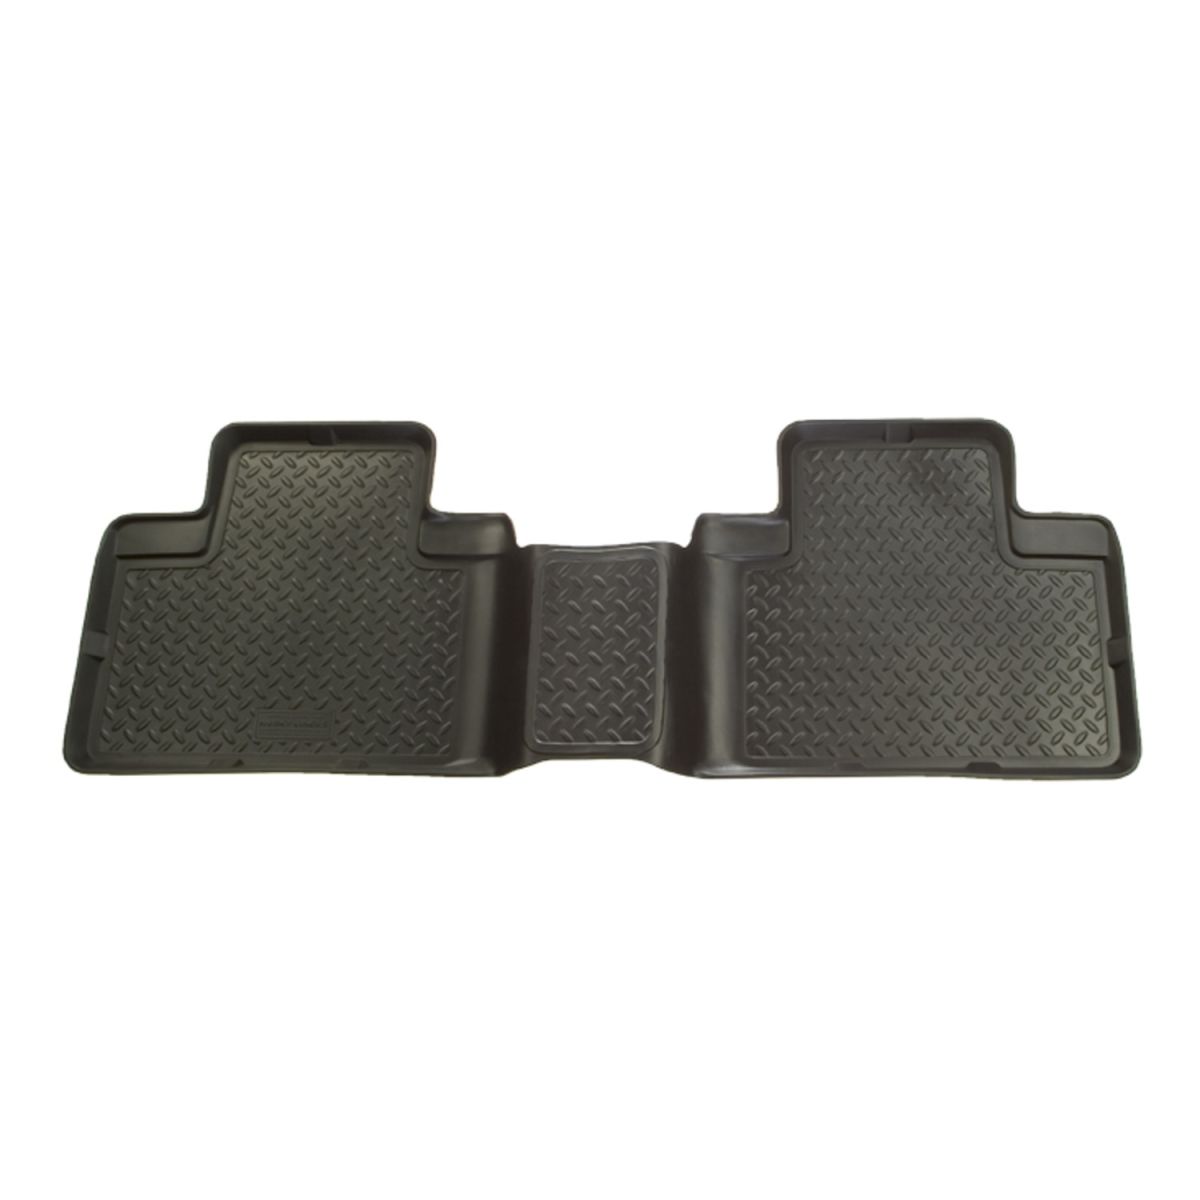 Husky Liners - Husky Liners 2nd Seat Floor Liner 88-00 Chevy C & K/GMC C & K Series Extended Cab-Black Classic Style 61101